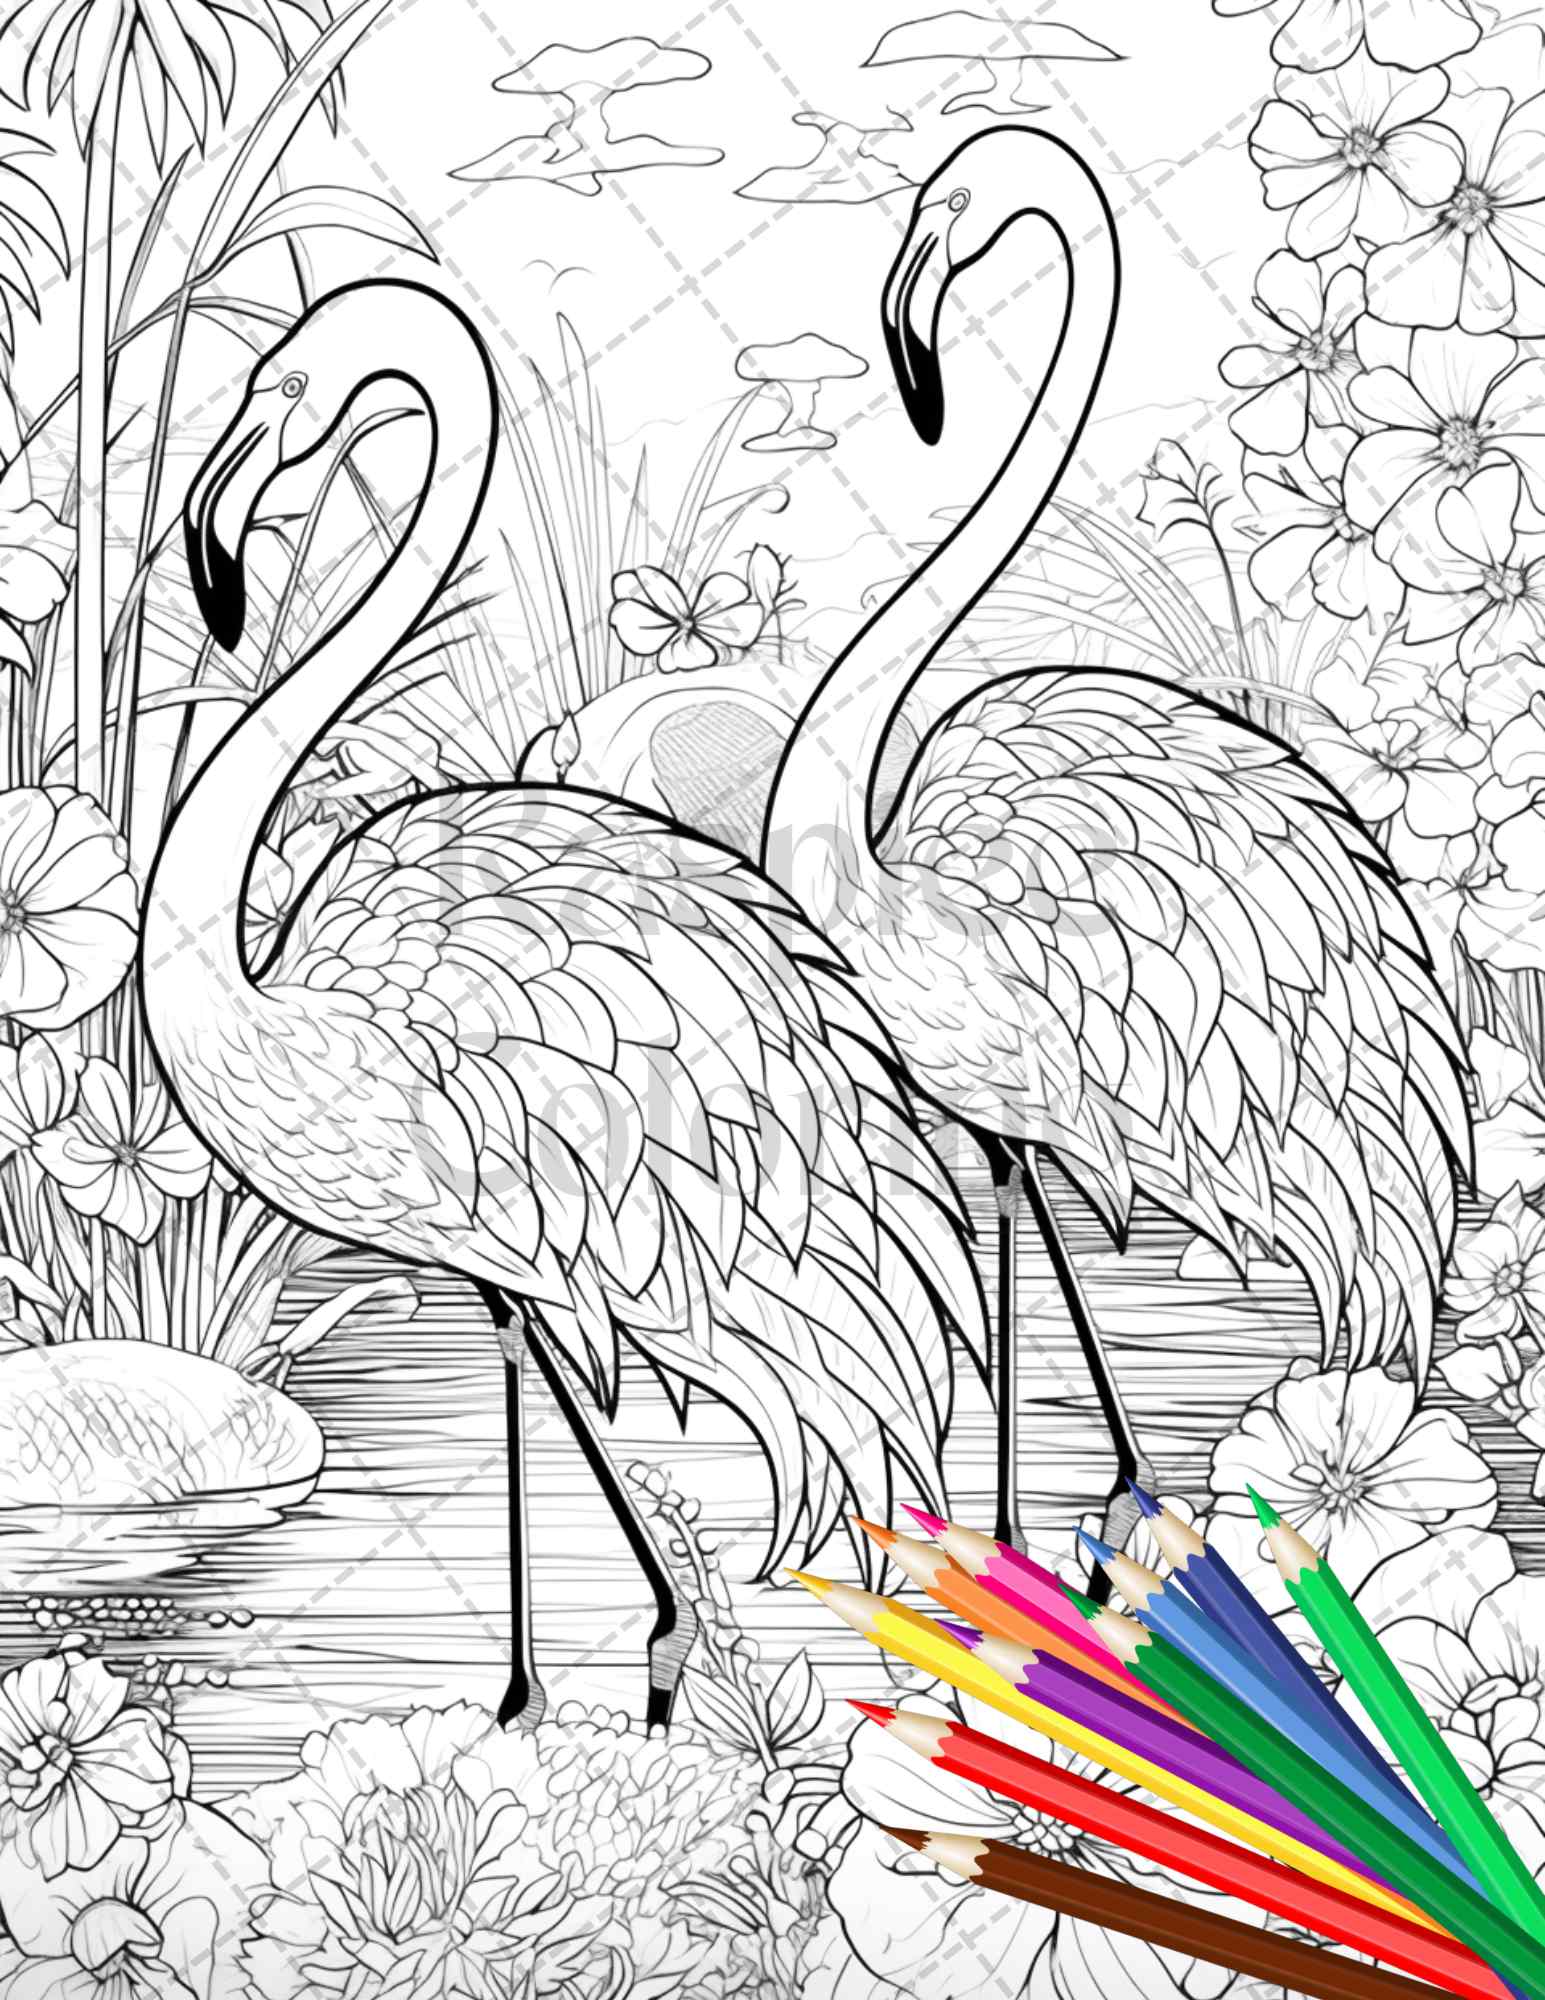 Flamingo Oasis Grayscale Coloring Pages Printable for Adults, PDF File Instant Download - raspiee